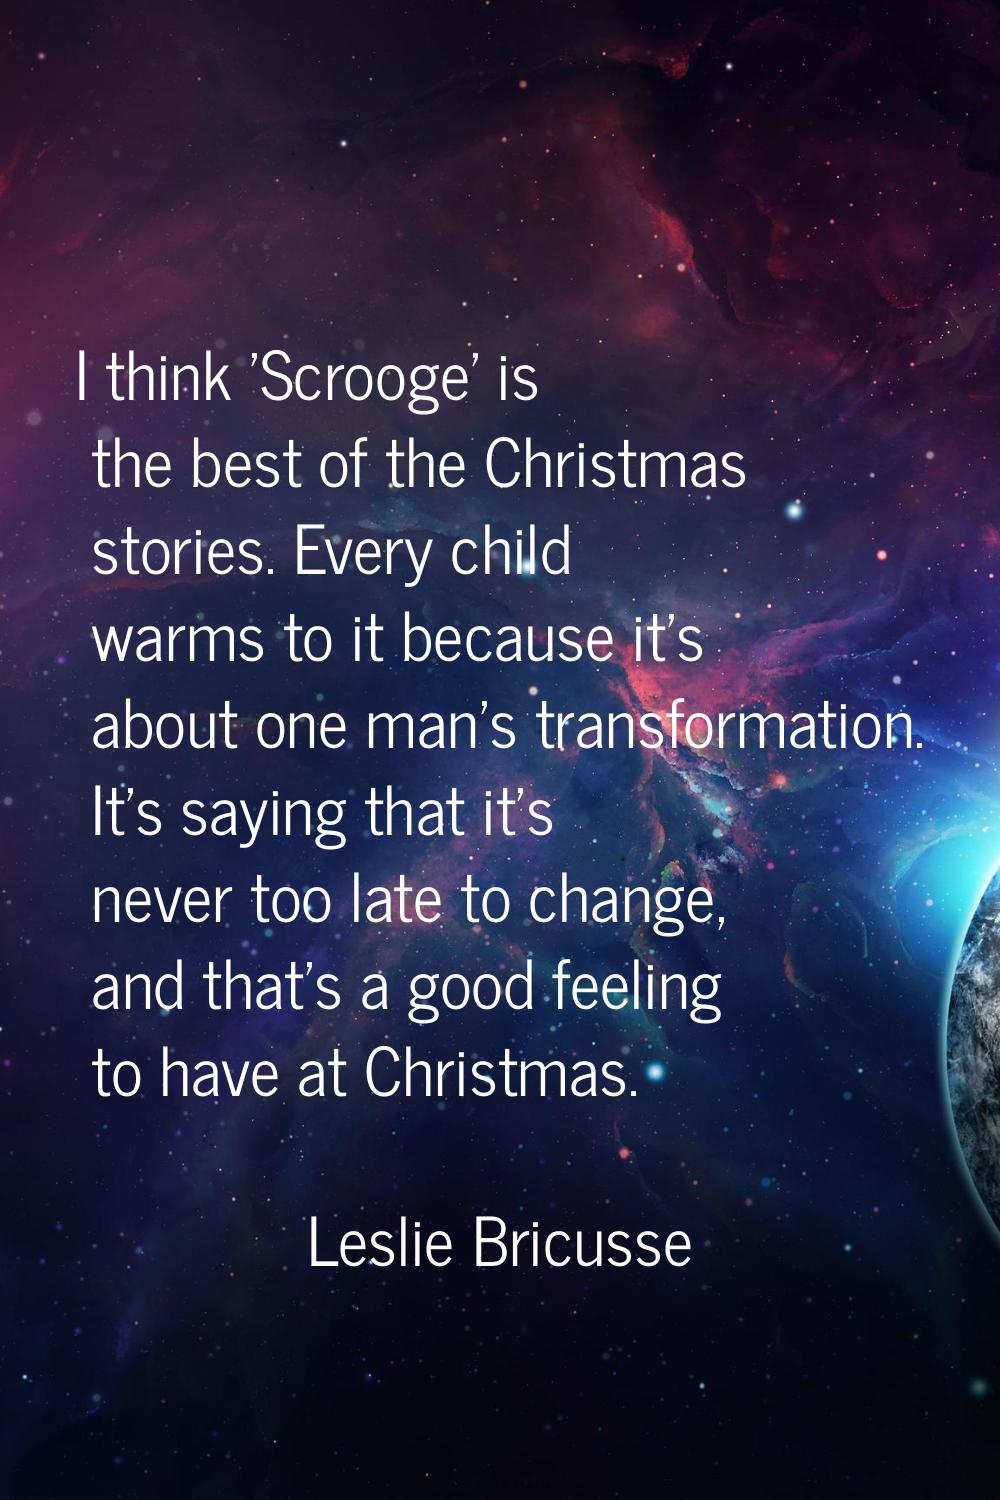 I think 'Scrooge' is the best of the Christmas stories. Every child warms to it because it's about 